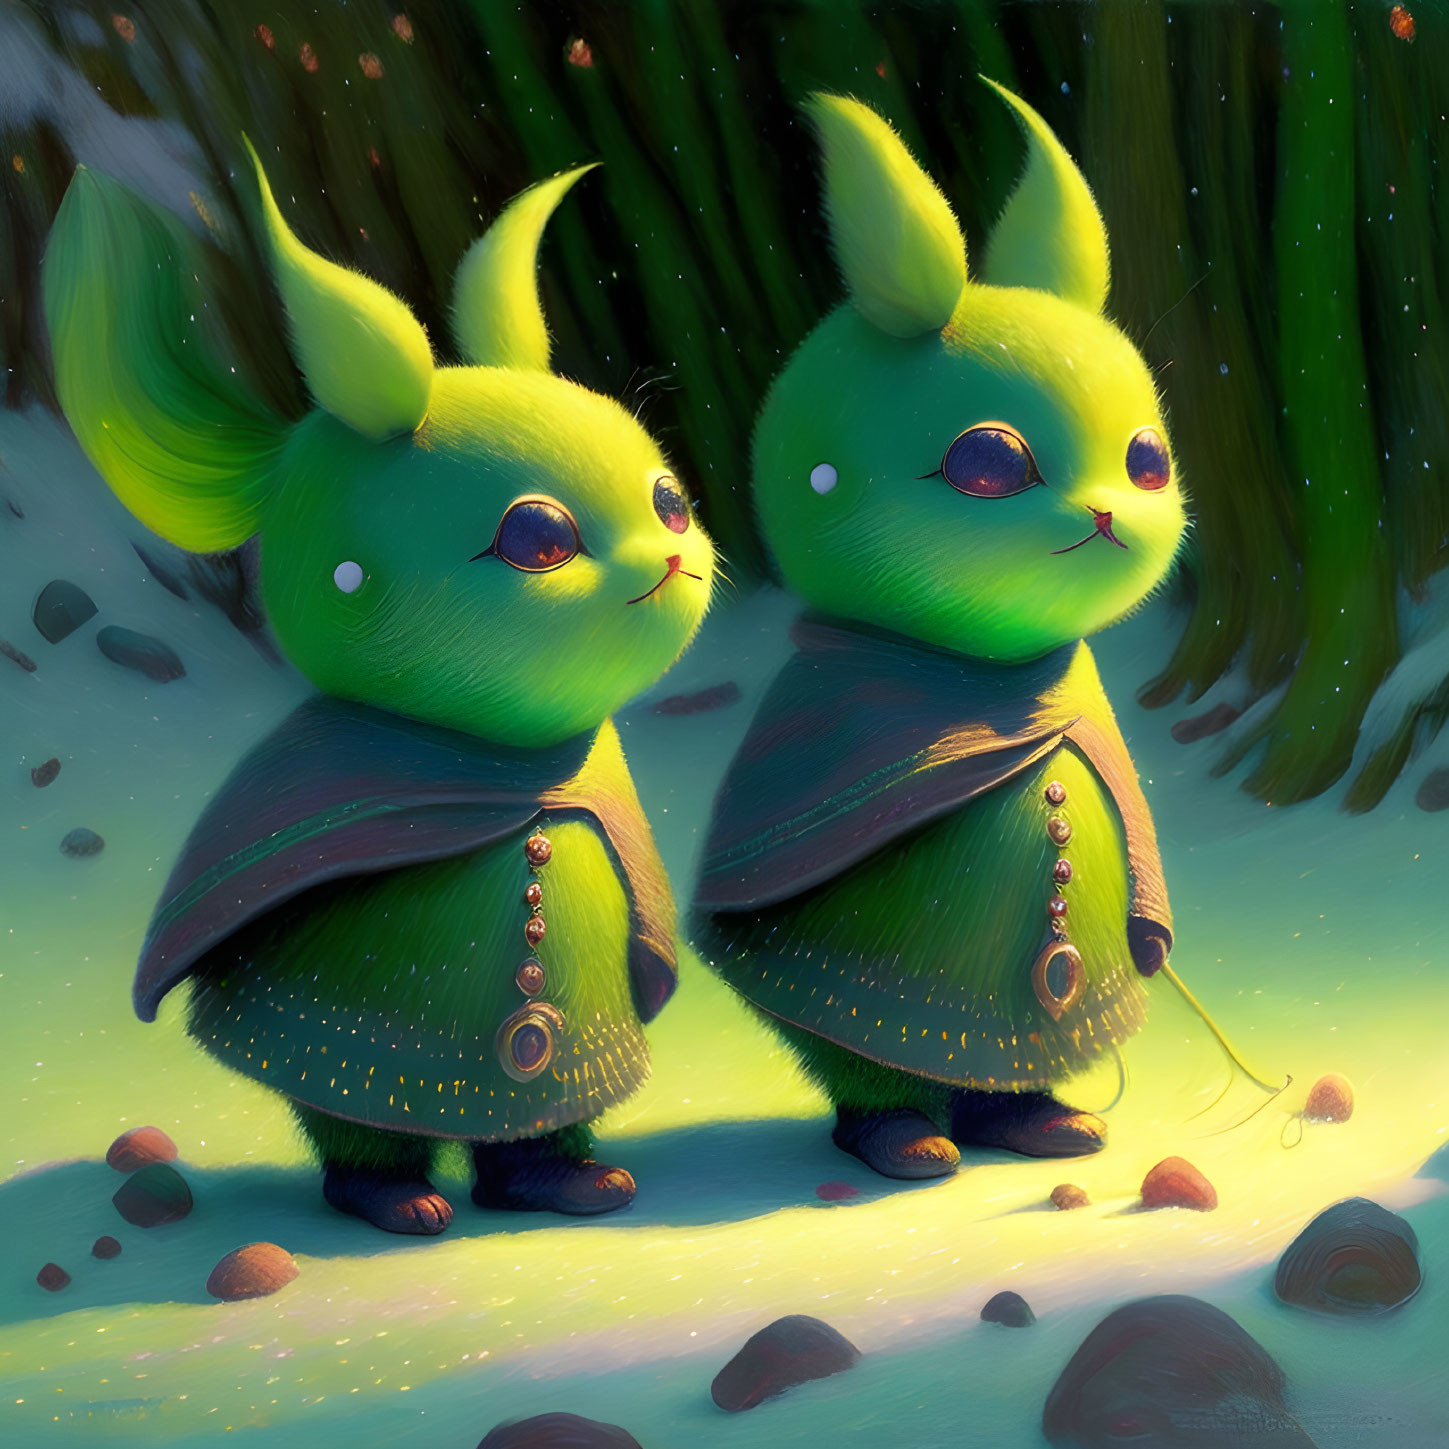 Whimsical green creatures with large ears in sunlit forest